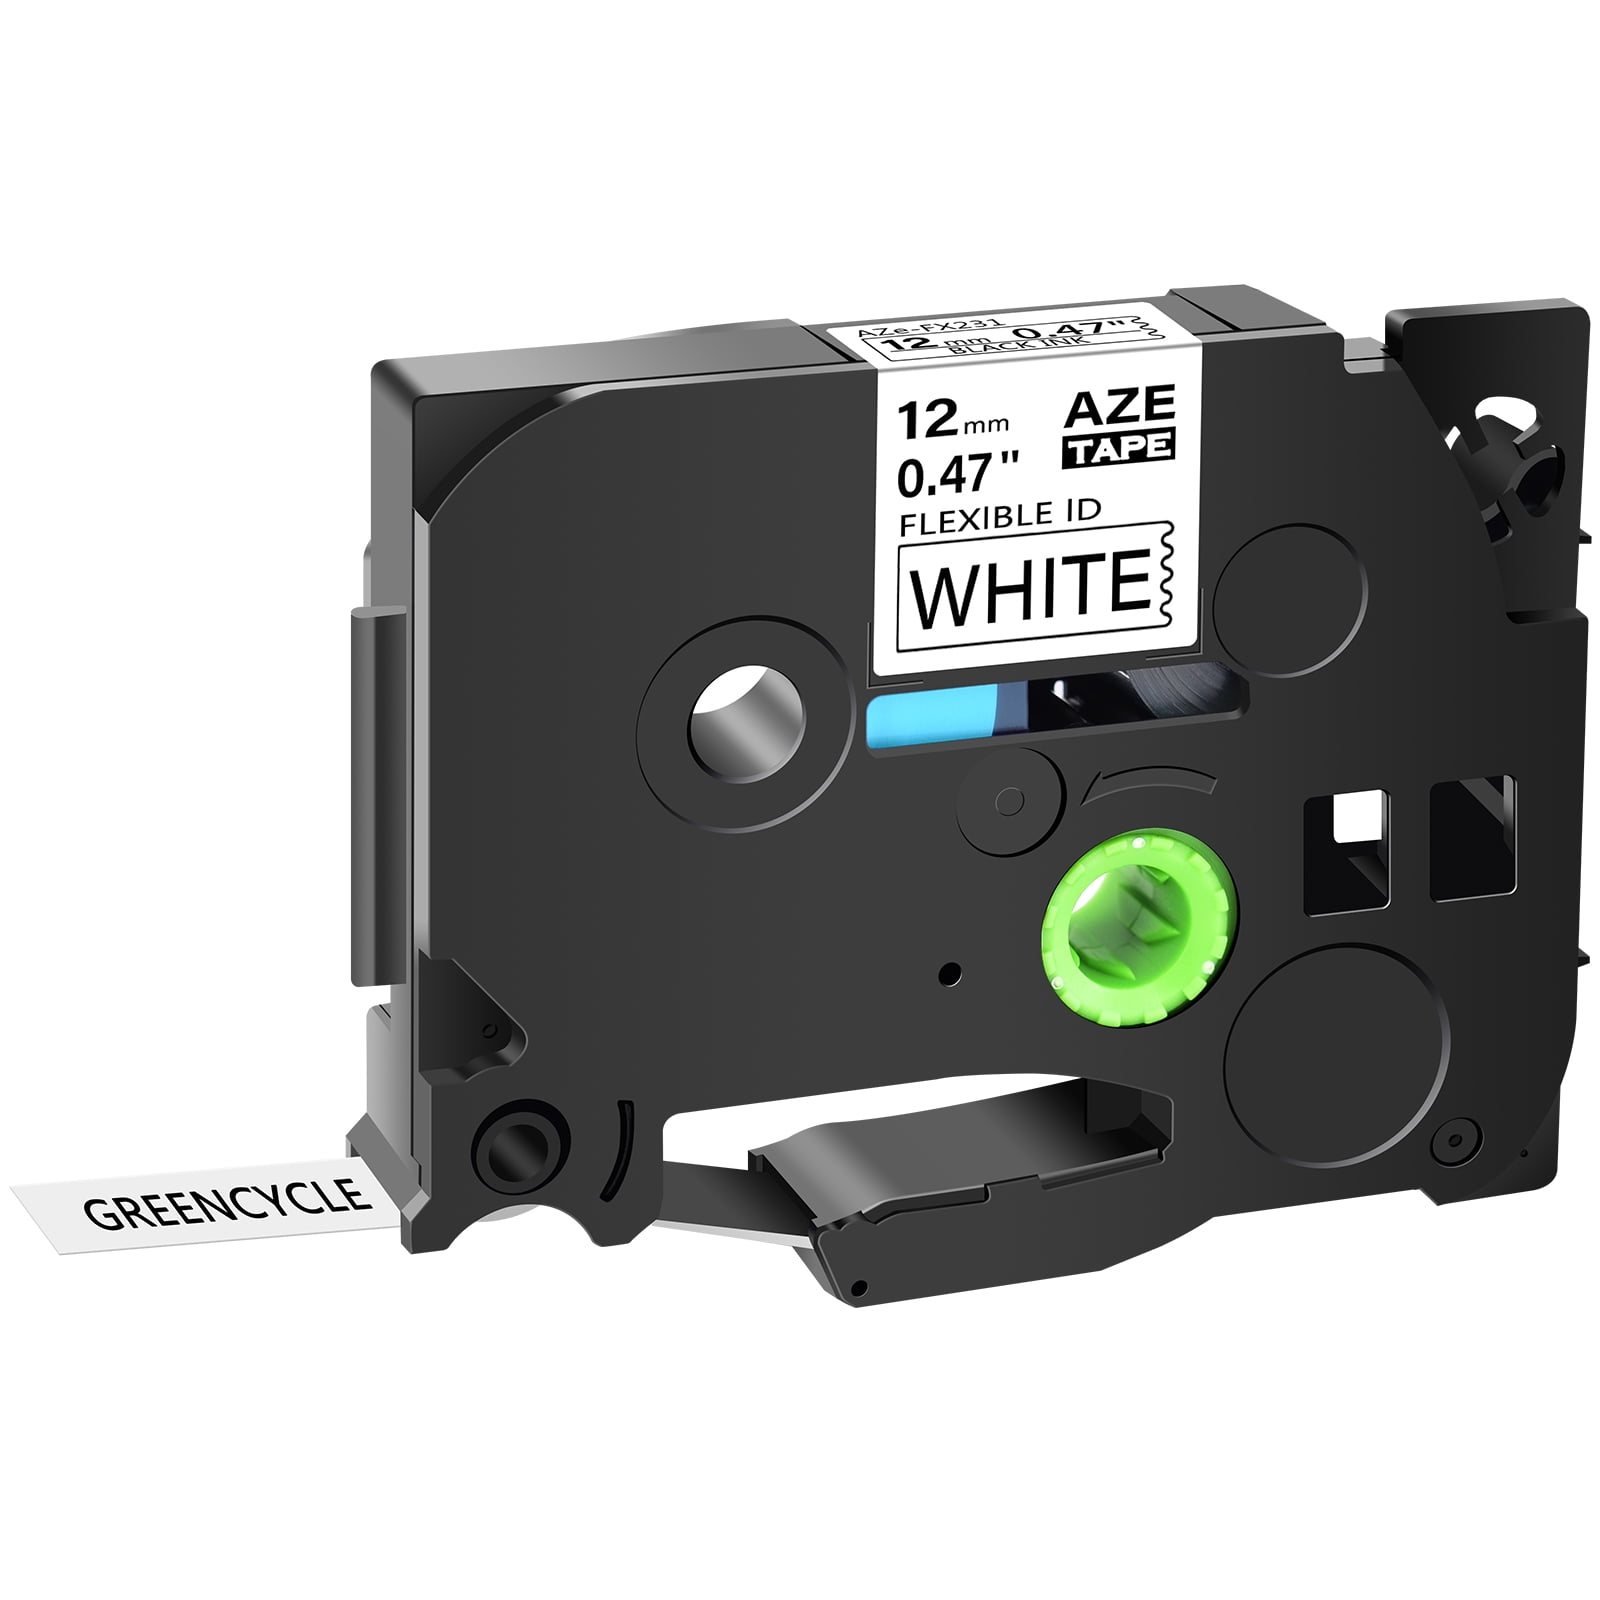 12mm x 8m Compatible Brother TZ Label Tape Cartridge for P-Touch Printer 